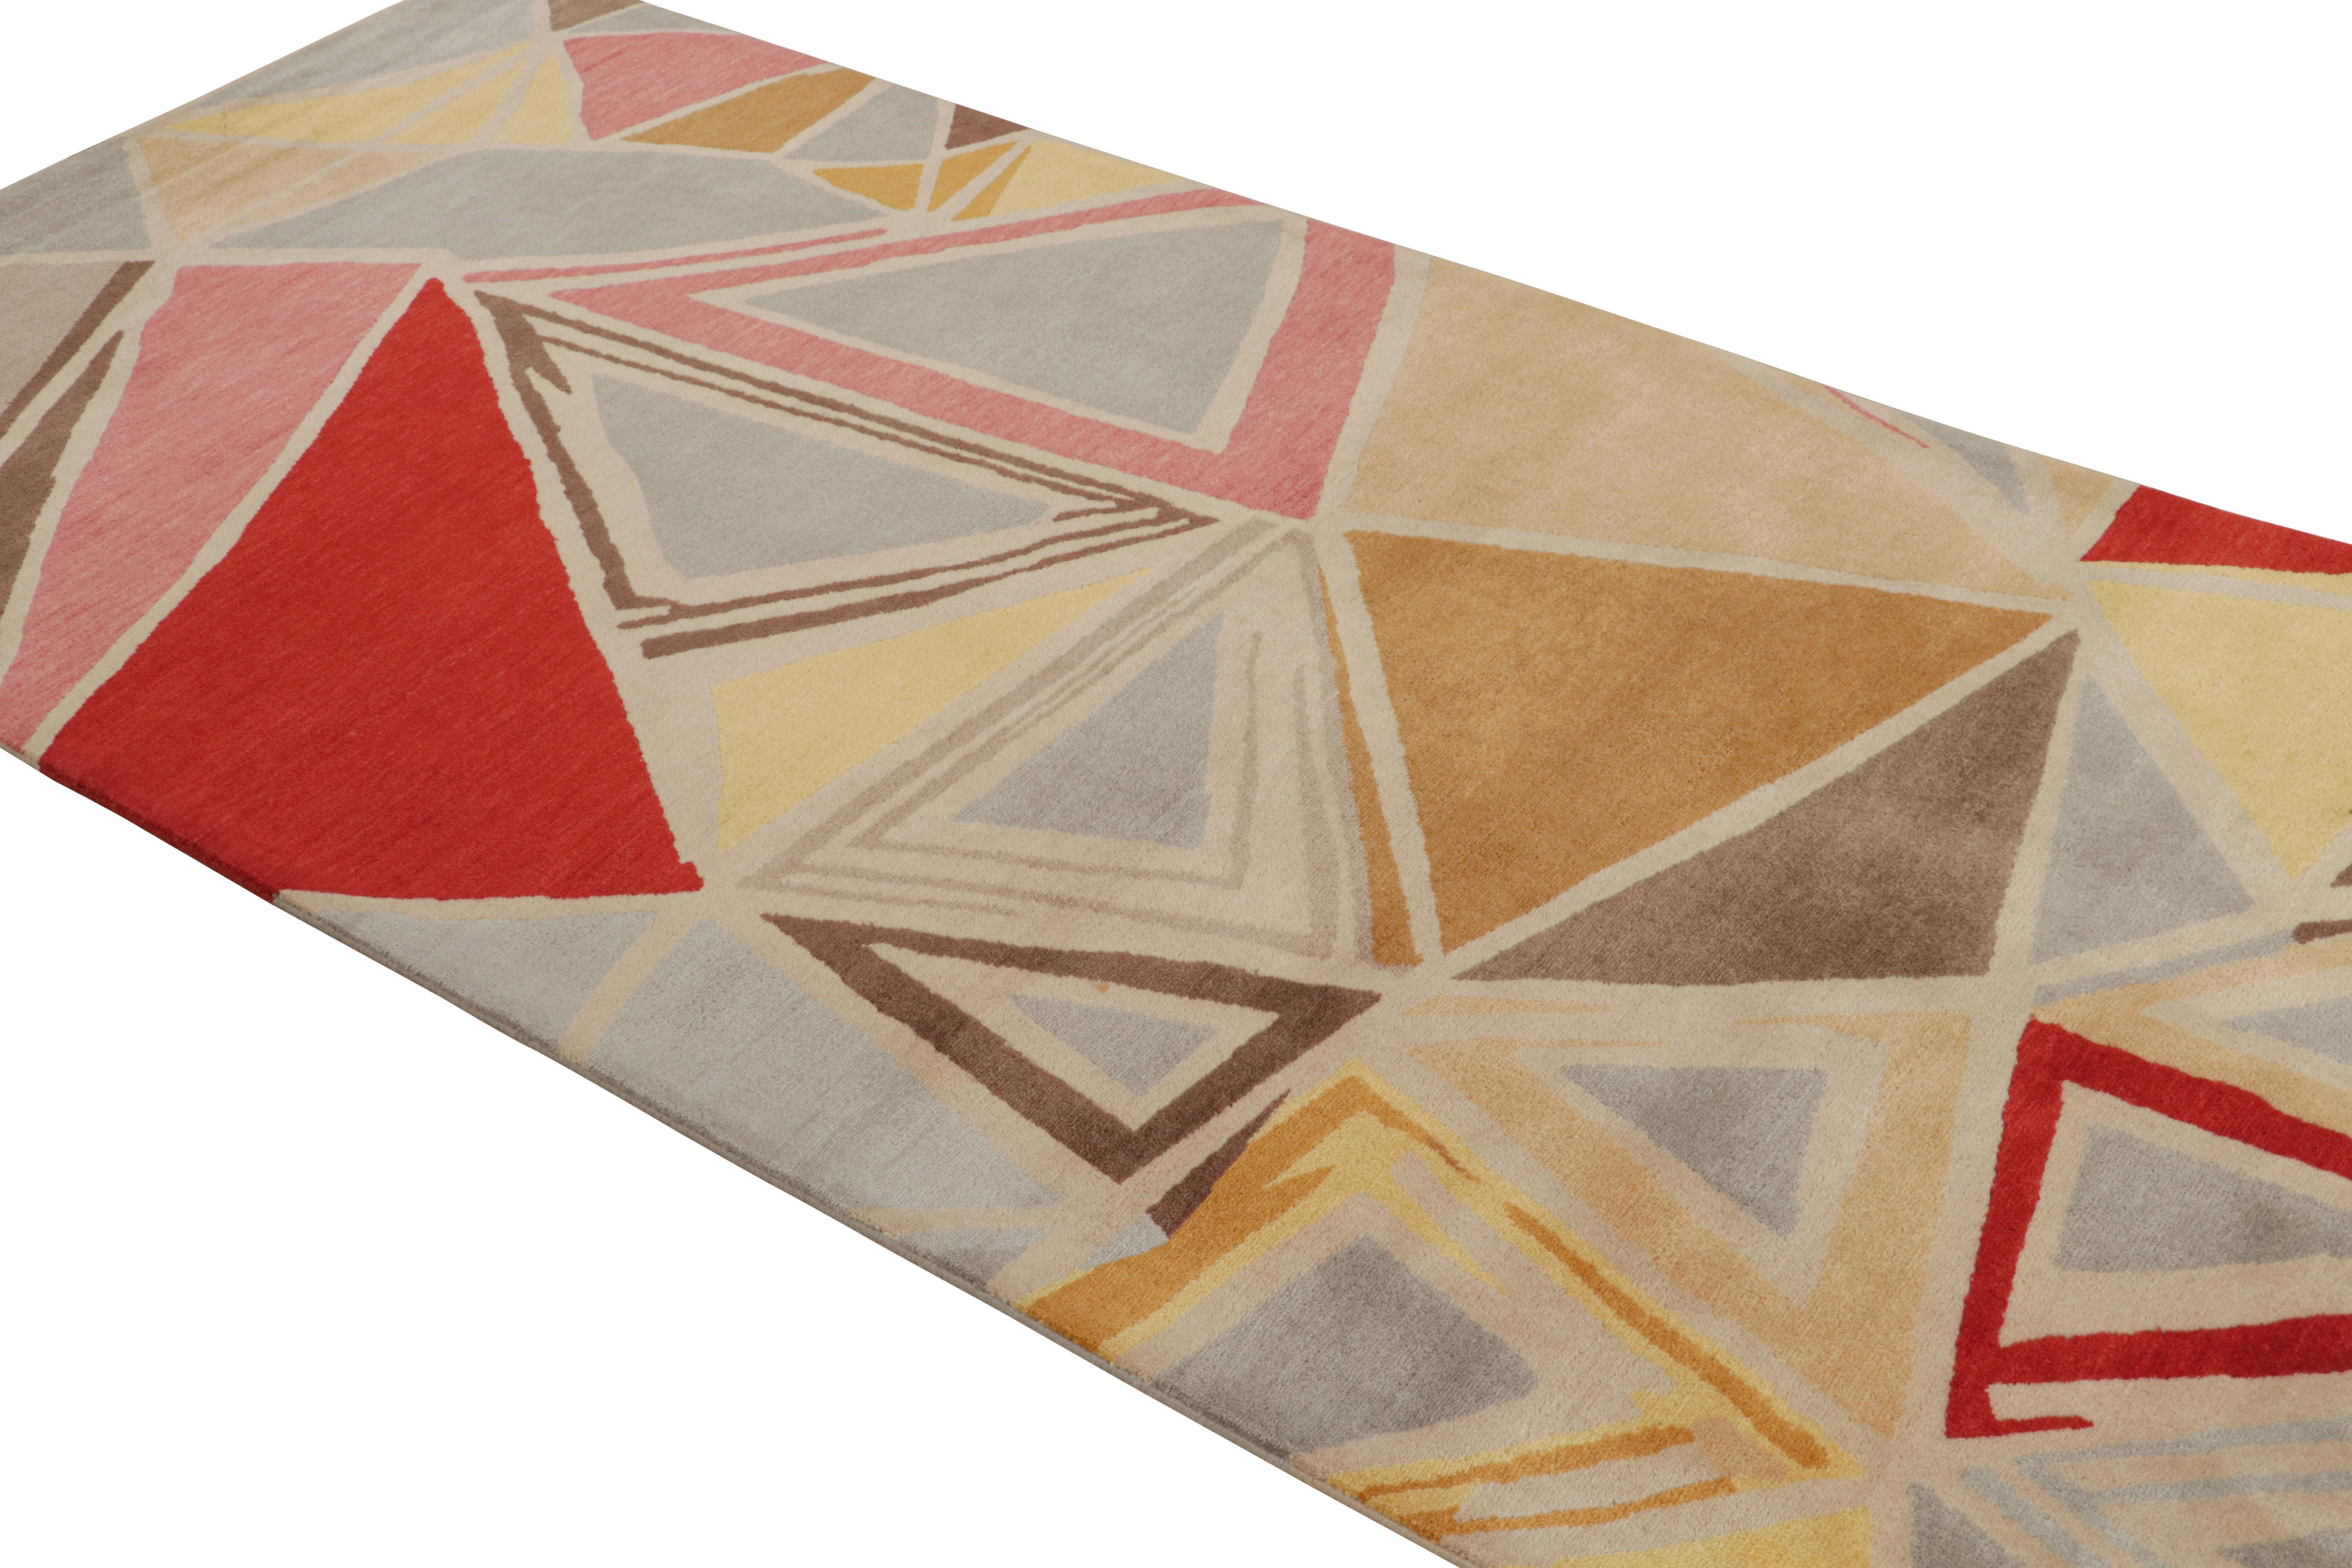 This 4x8 runner is from the Mid-century modern rug collection from Rug & Kilim—hand-knotted in wool and silk.  

On the design: 

Inspired from a rare modernism, this 4x8 rug further exemplifies our mid-century modern take in the marriage of joyful,